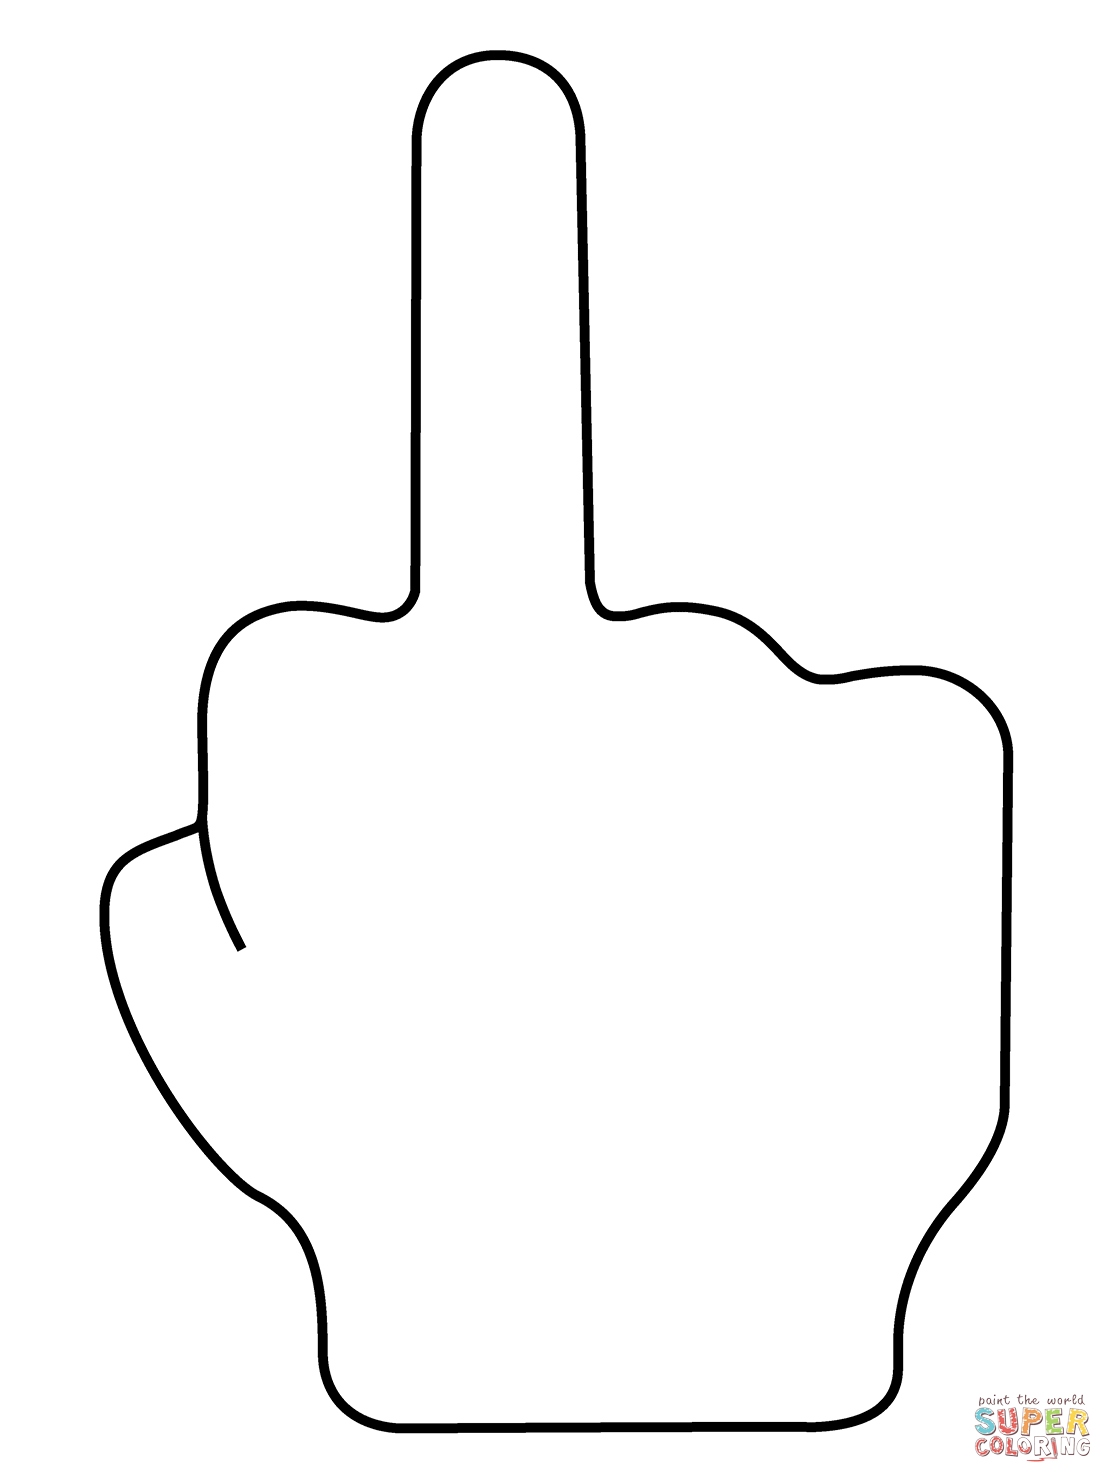 Middle finger emoji coloring page free printable coloring pages